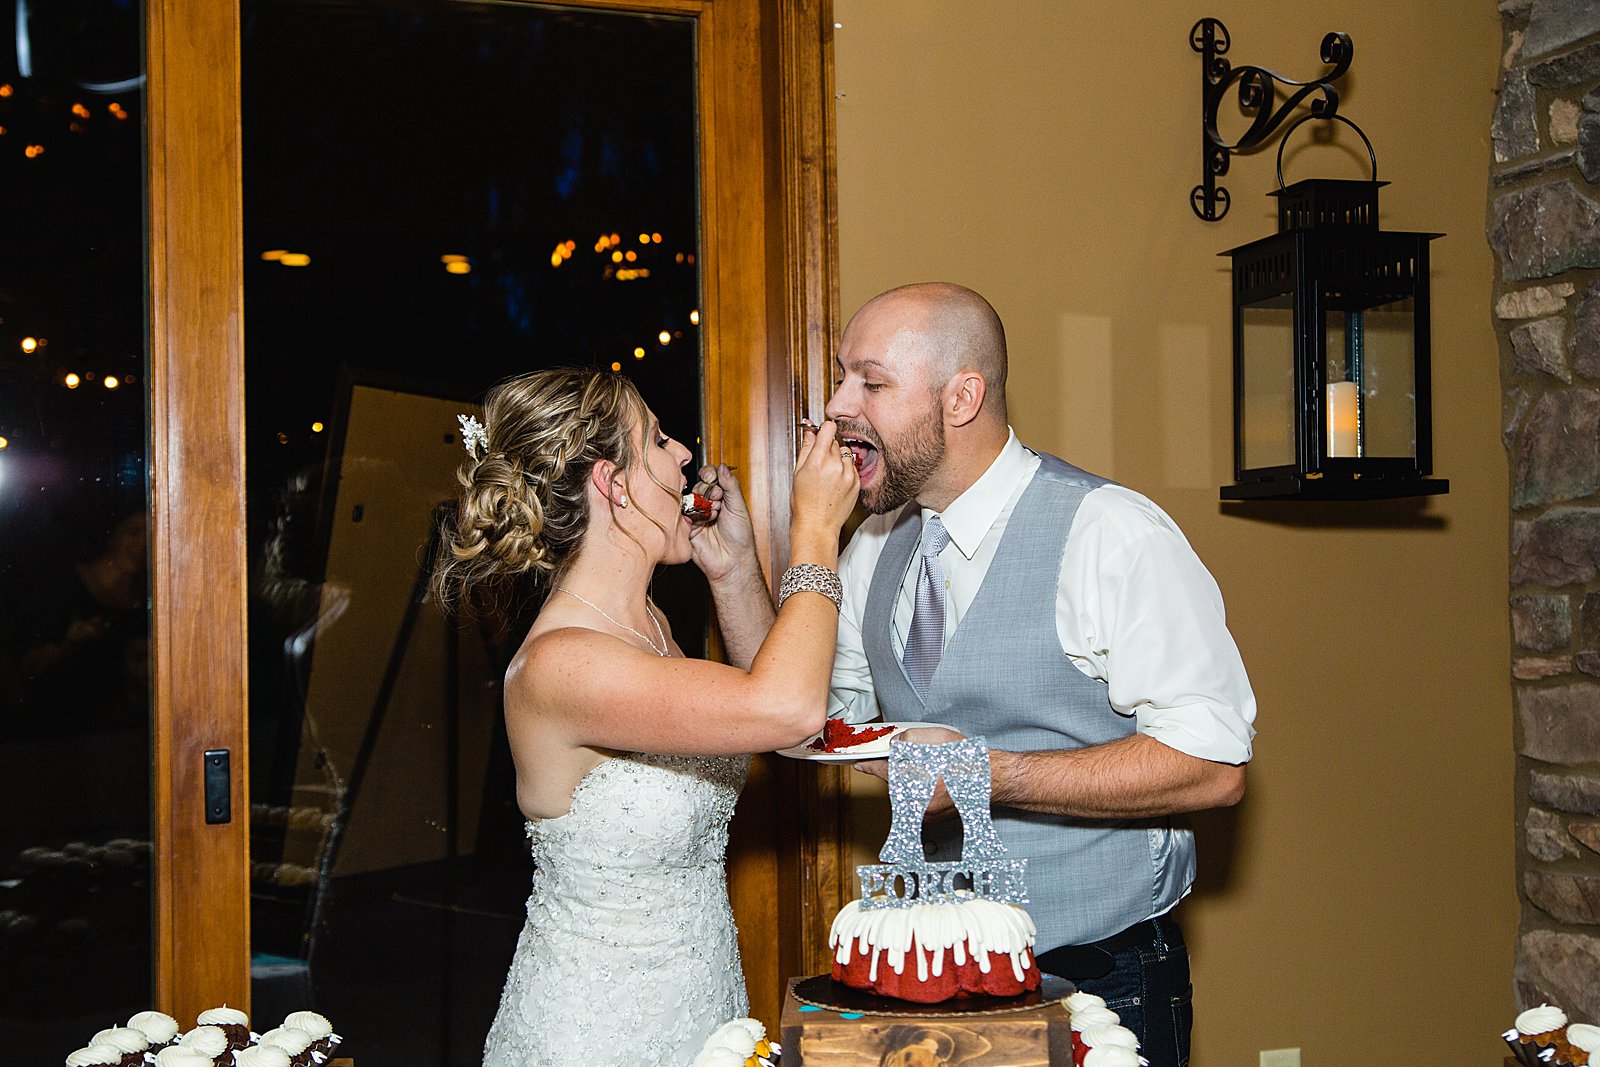 Bride and Groom cutting their wedding cake at their The Windmill House wedding reception by Arizona wedding photographer PMA Photography.